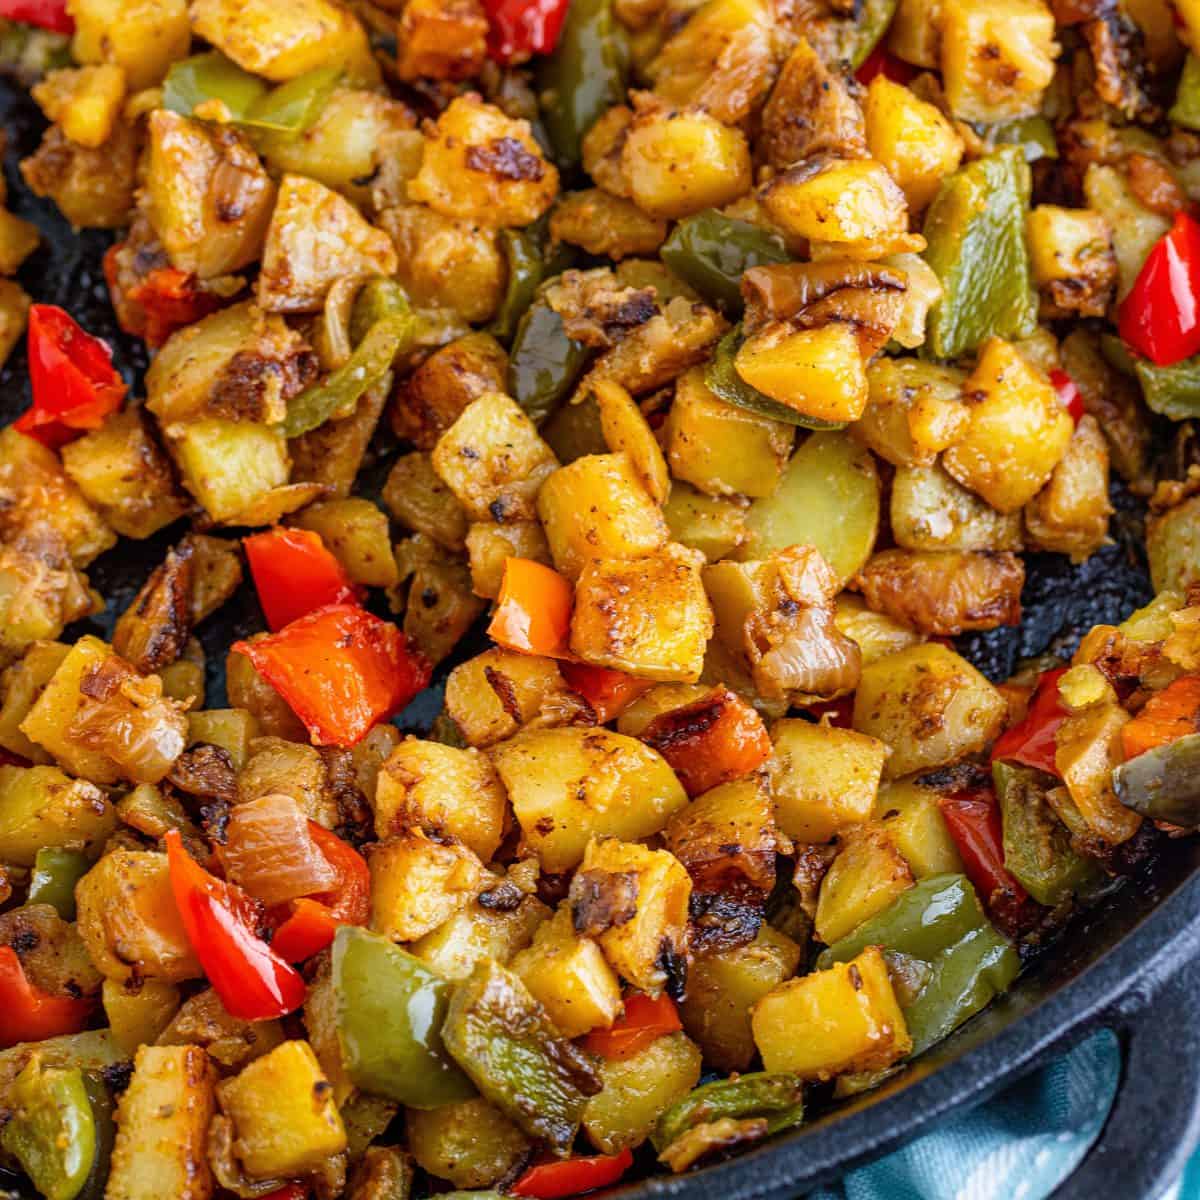 Southern Home Fries